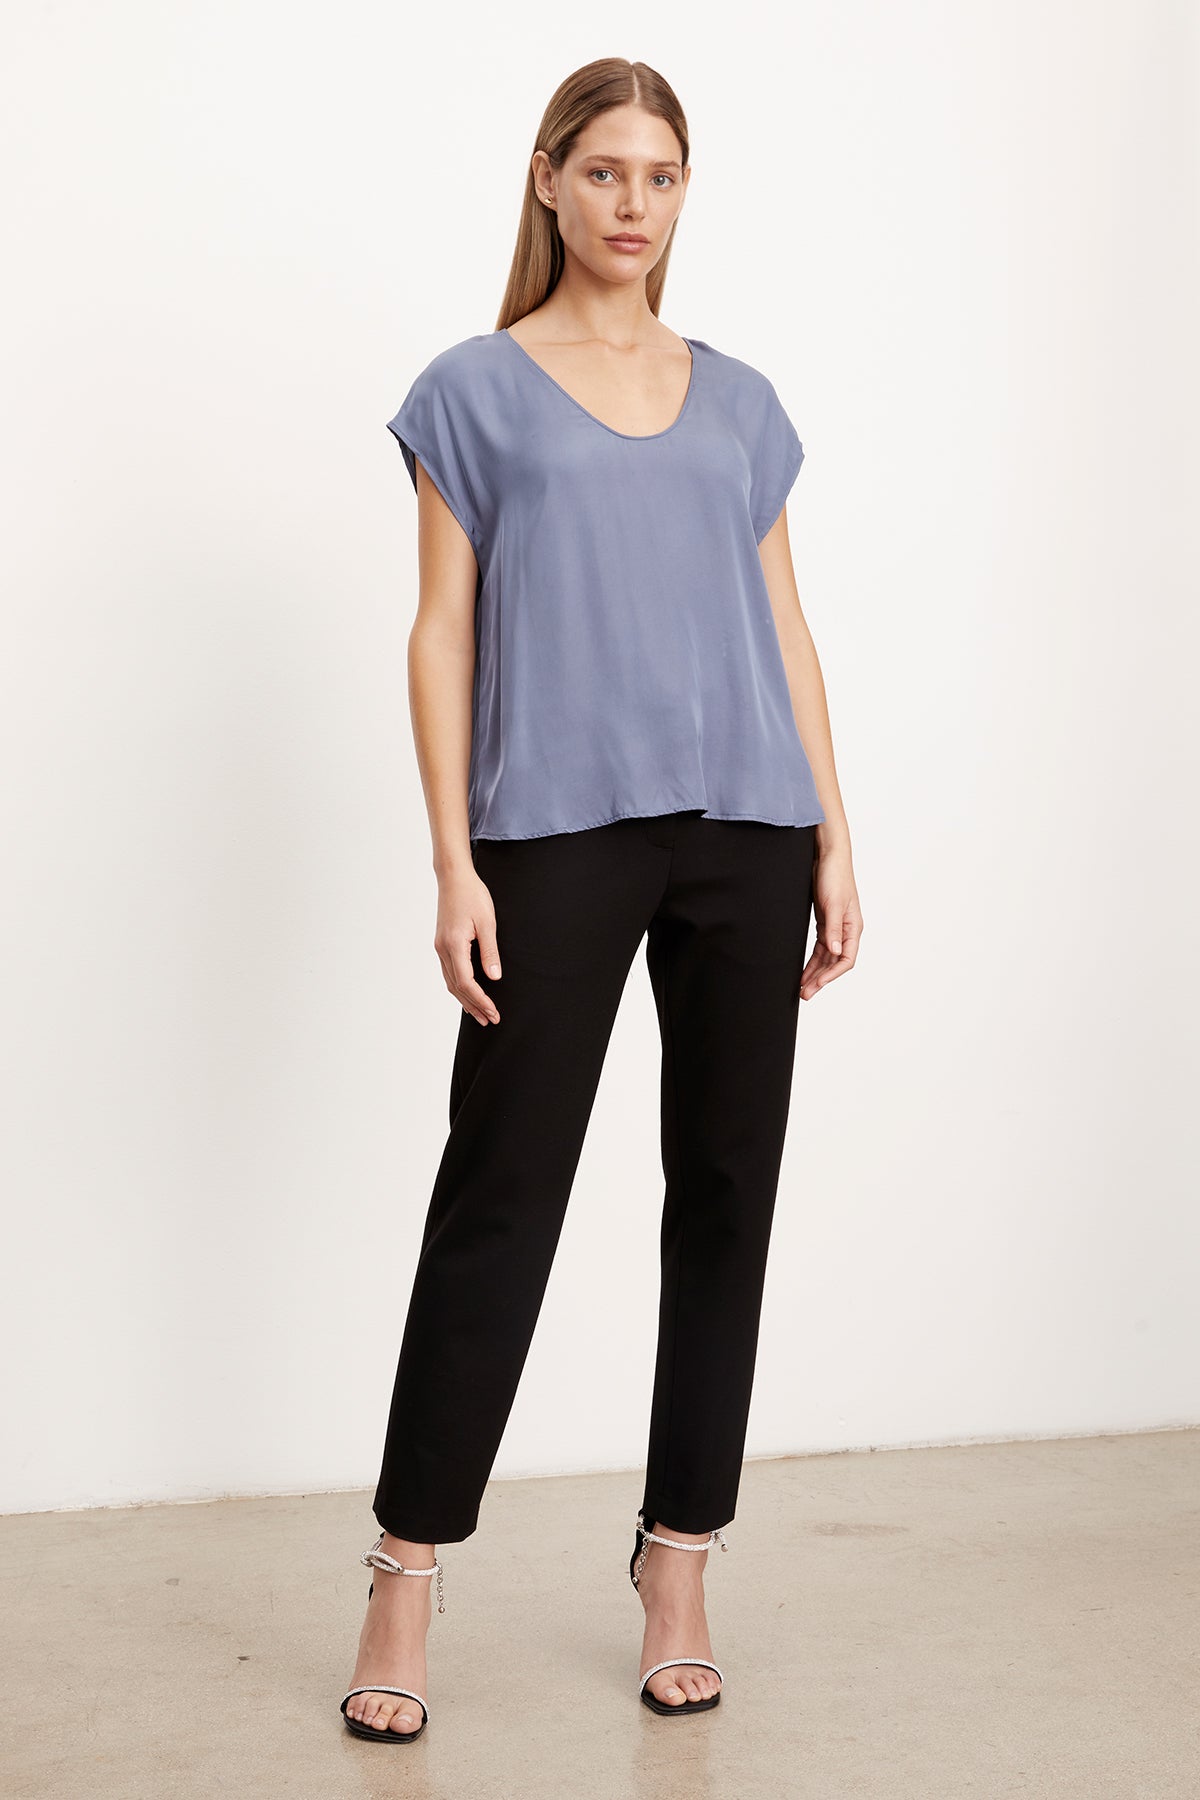   The model is wearing a blue v-neck top and Velvet by Graham & Spencer JAY PONTI STRAIGHT LEG PANT. 